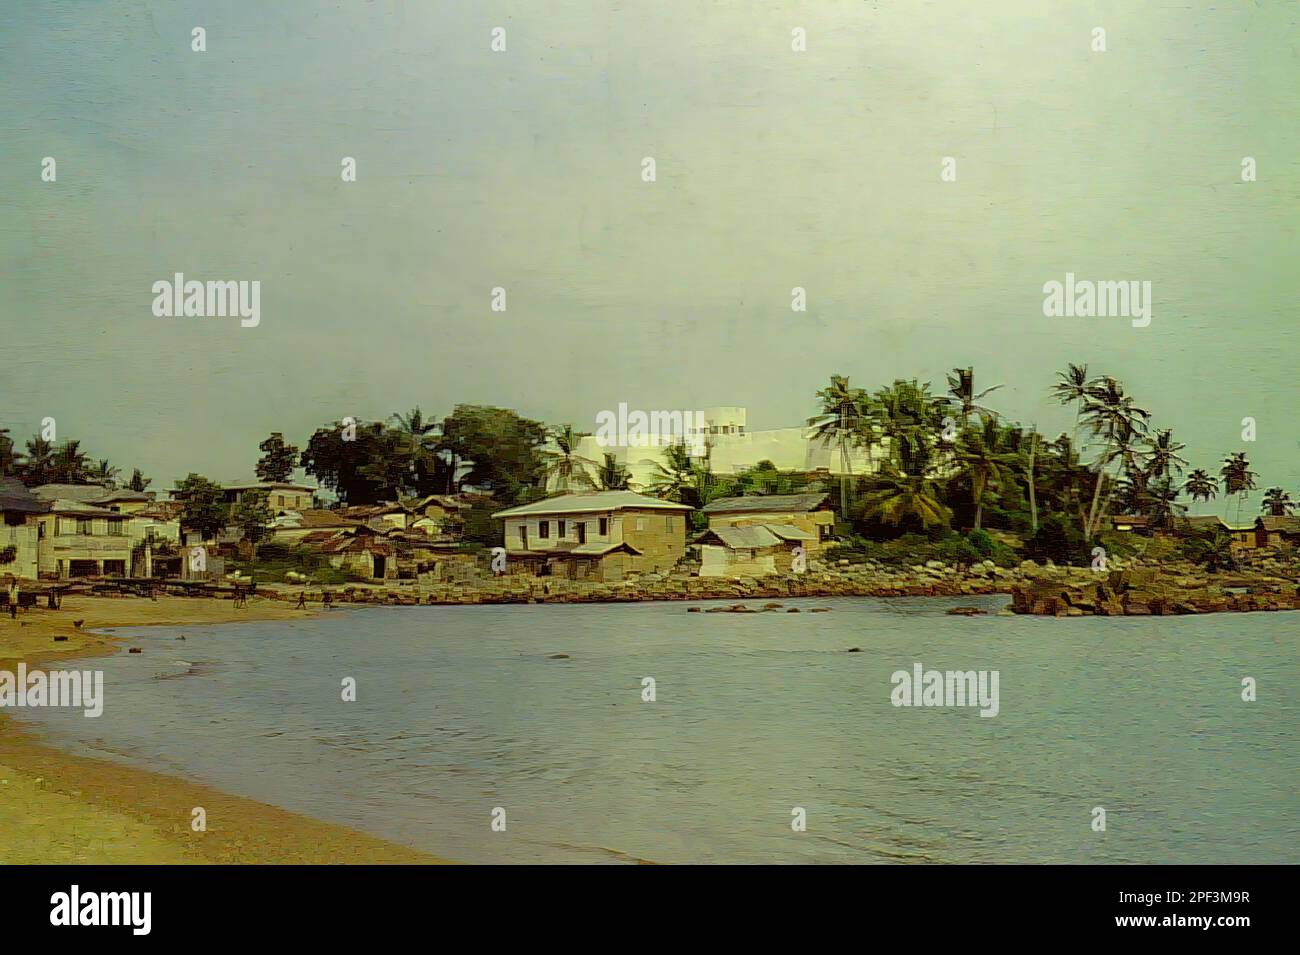 The beach and Fort Metal Cross (previously known as Fort Dixcove) in Dixcove, Ghana c.1959 Stock Photo